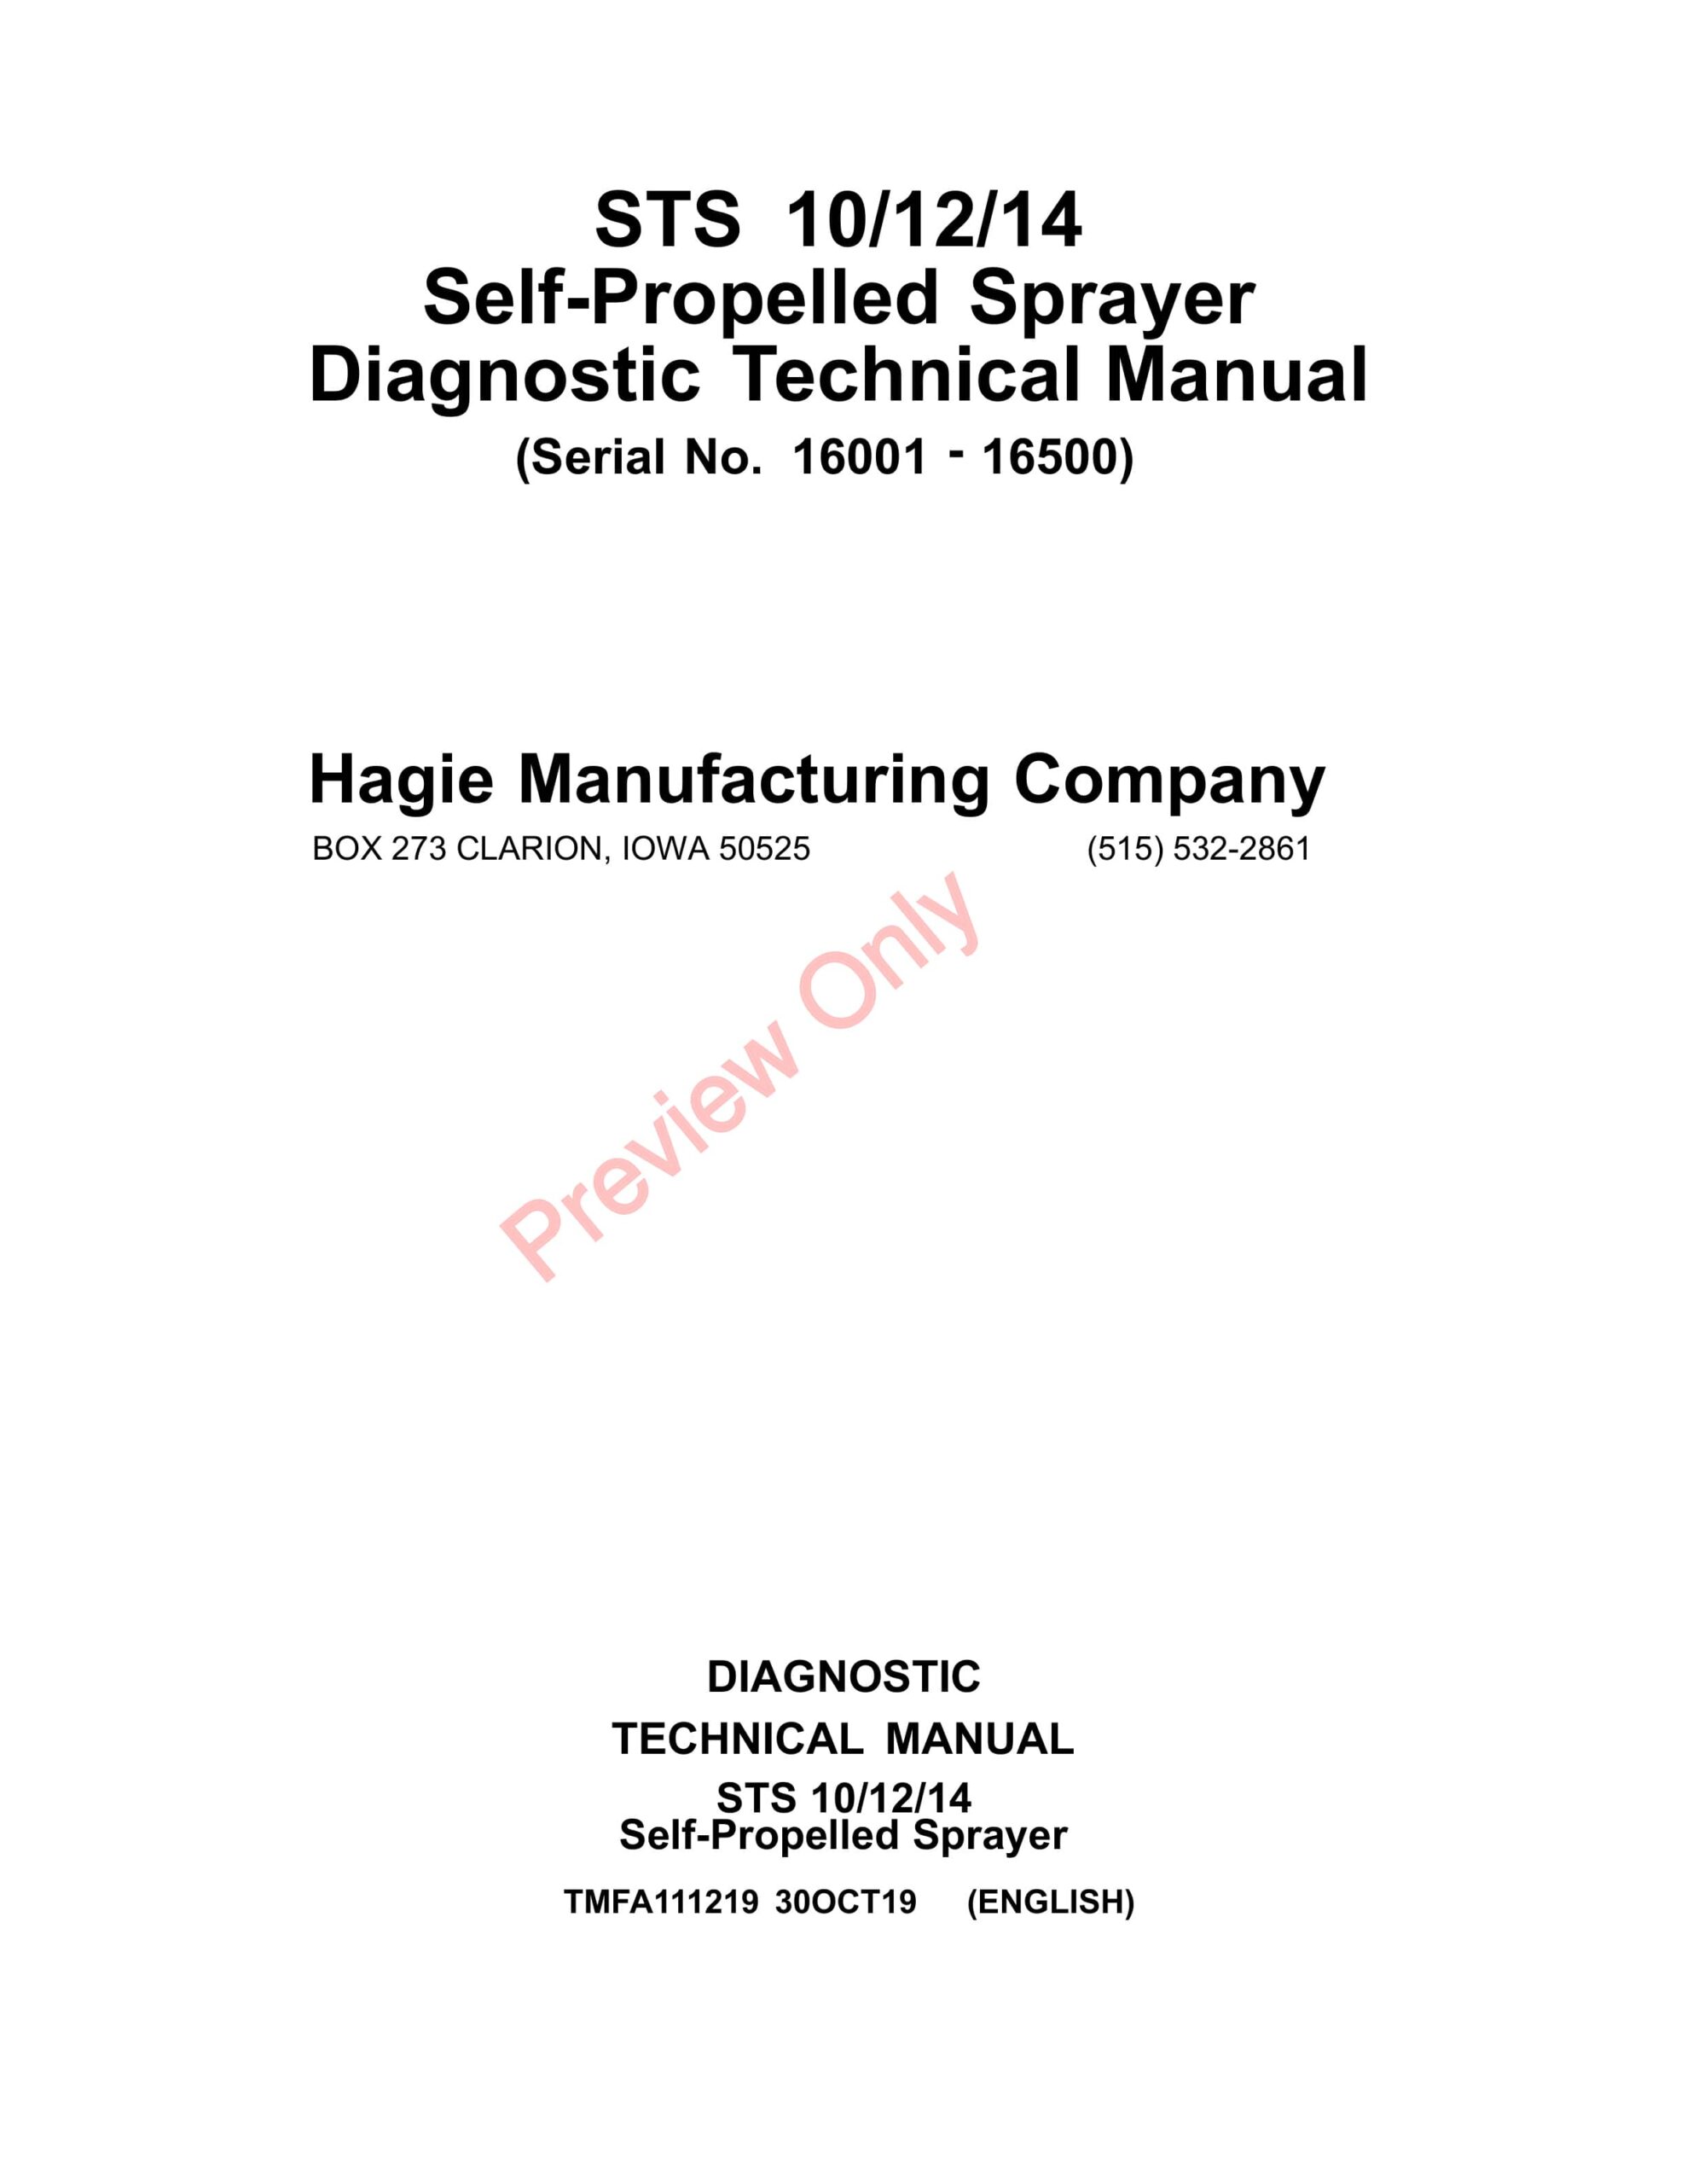 John Deere STS10, STS12, STS14 Self-Propelled Sprayer (16001-16500) Diagnostic Technical Manual TMFA111219 30OCT19-1